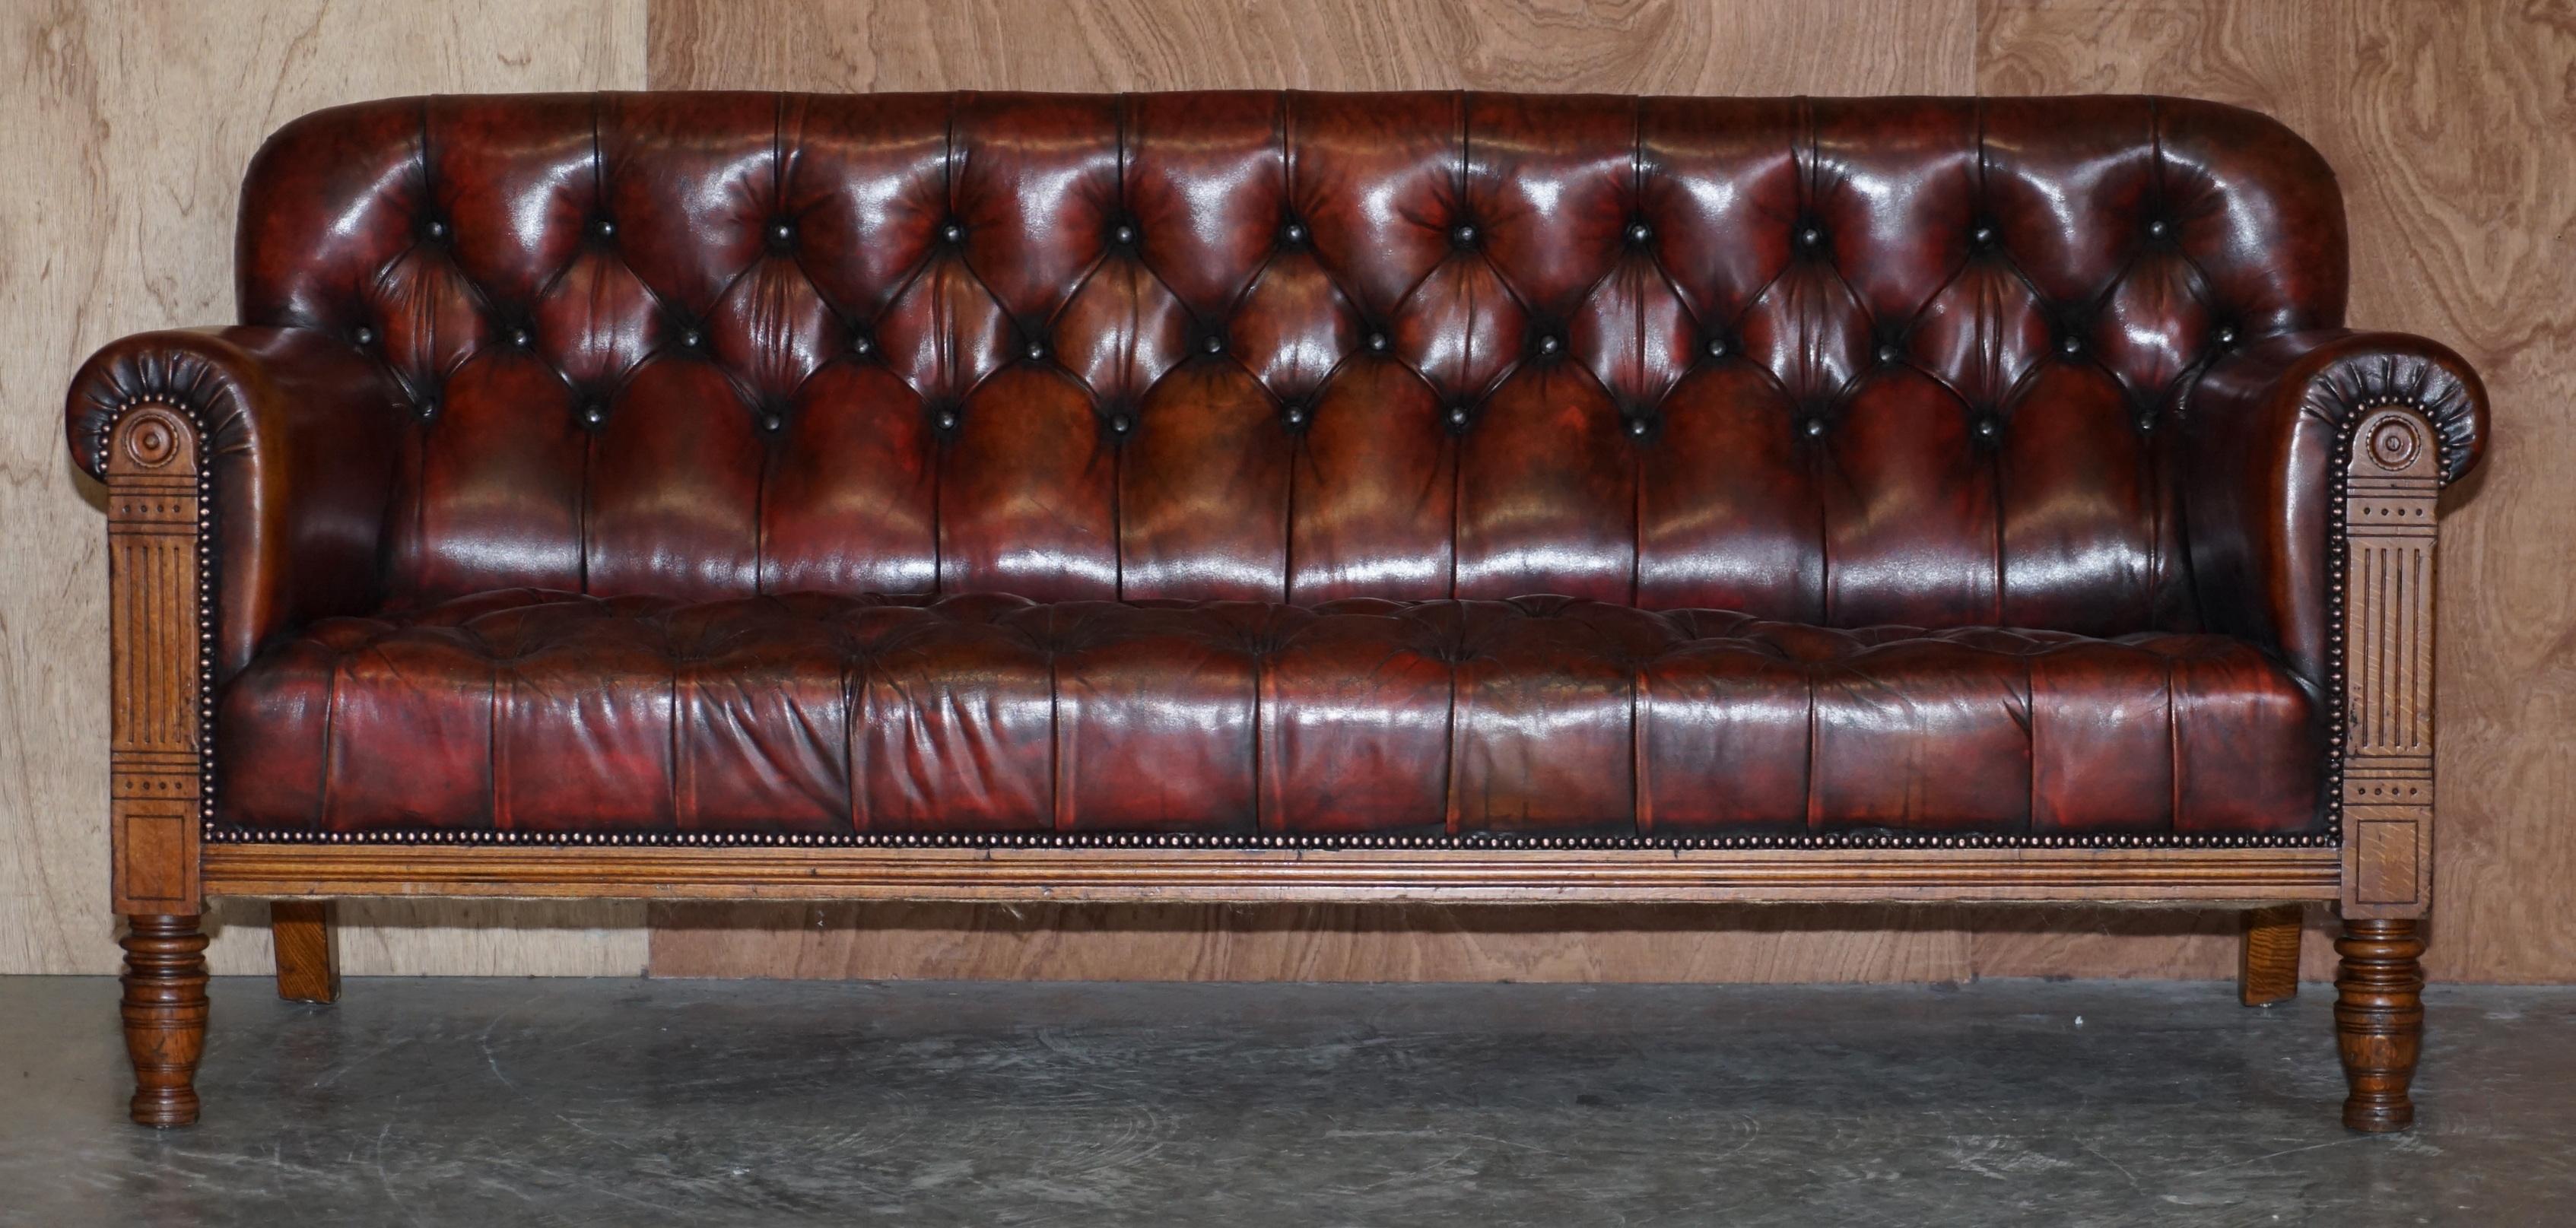 We are delighted to offer for sale this Exhibition quality Wylie & Lochhead of Glasgow circa 1860 fully restored Hand dyed brown leather Chesterfield sofa

This piece is absolutely sublime, made by the genius’s that were Wylie & Lochhead. The